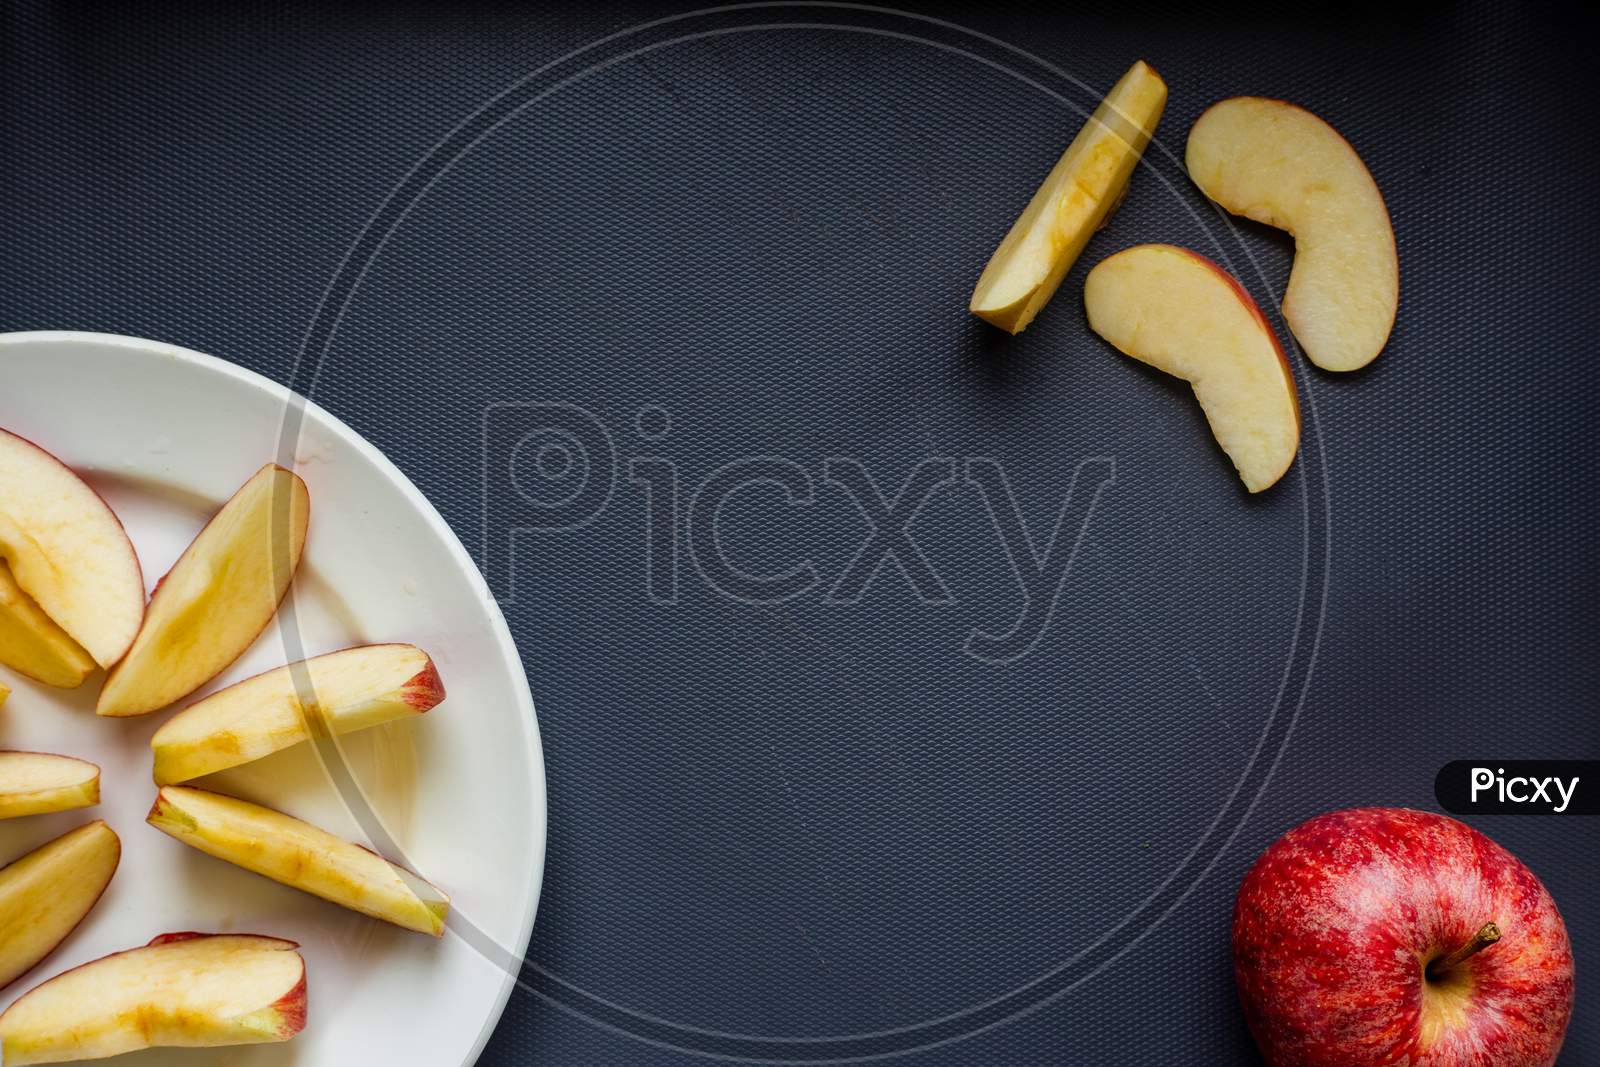 Slice of Apple and pieces